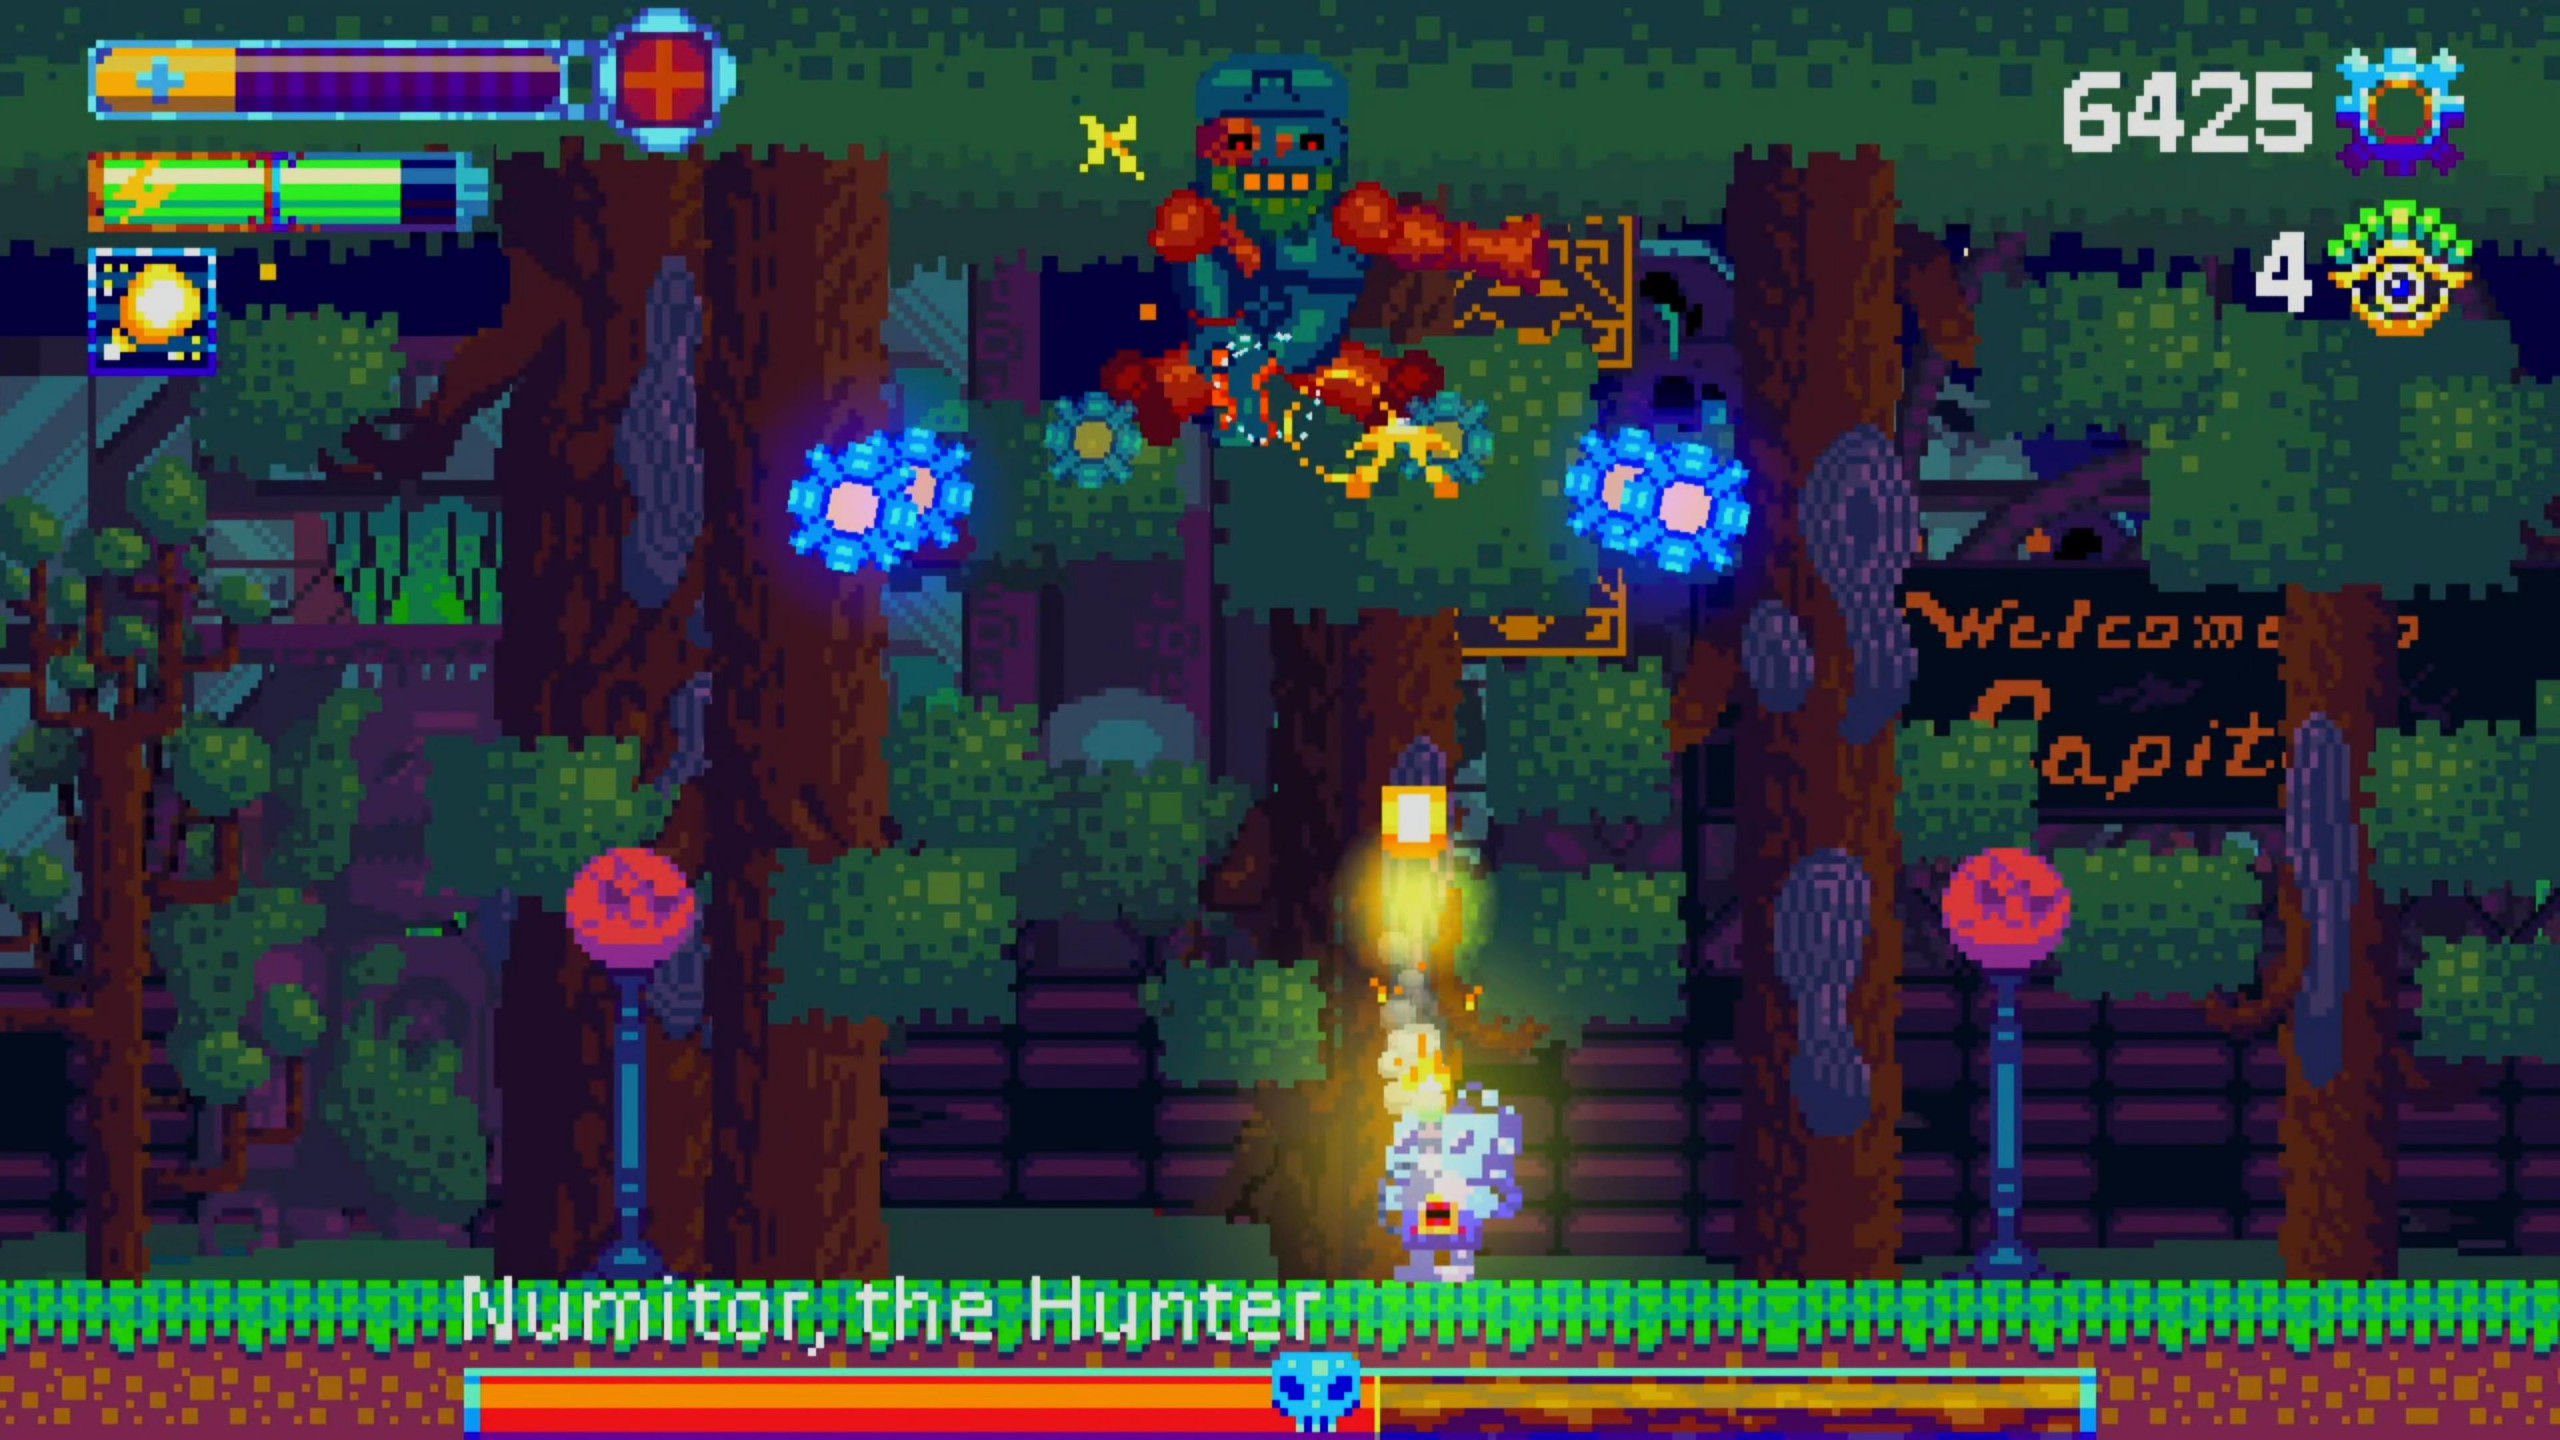 The boss "Numitor, the hunter" levitates at top center of the screen while firing projectiles downwards. OmegaBot stands at bottom firing upwards towards the enemy